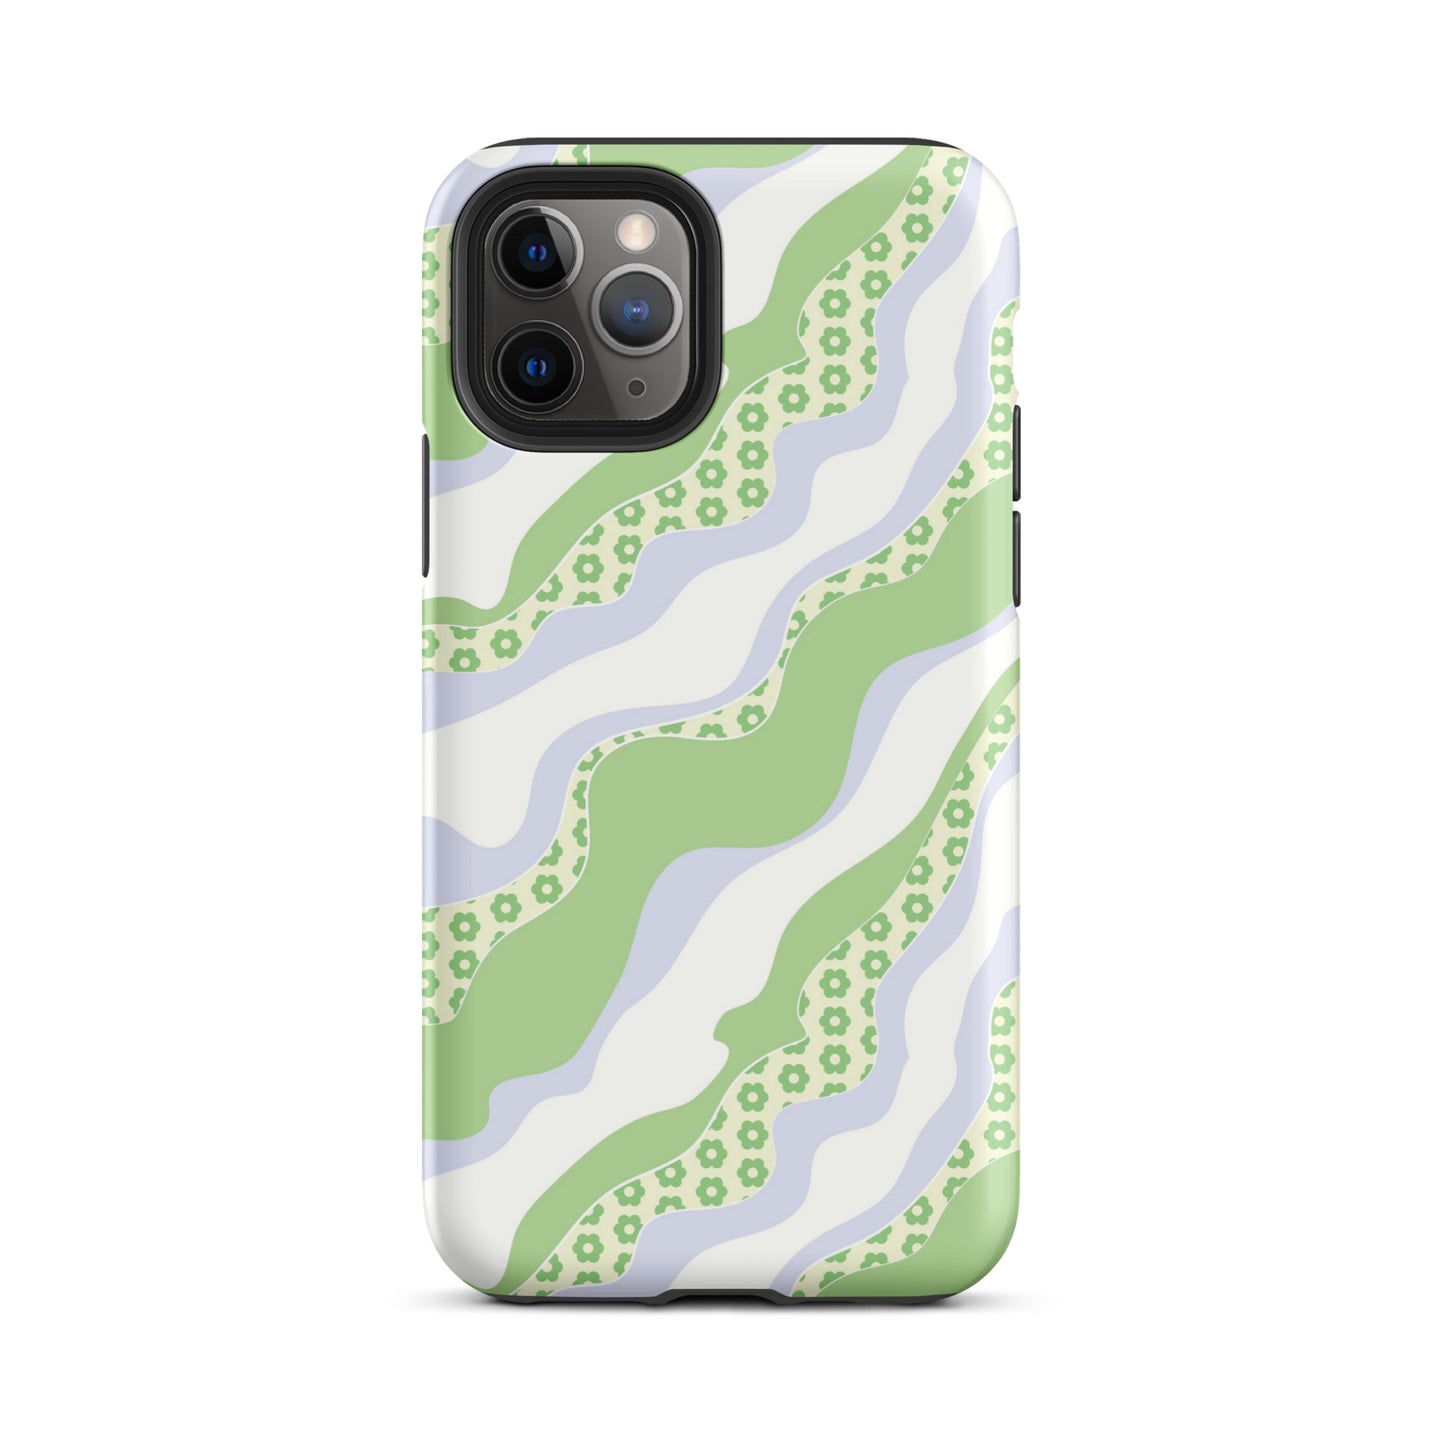 Flower Groove iPhone Case Matte iPhone 11 Pro